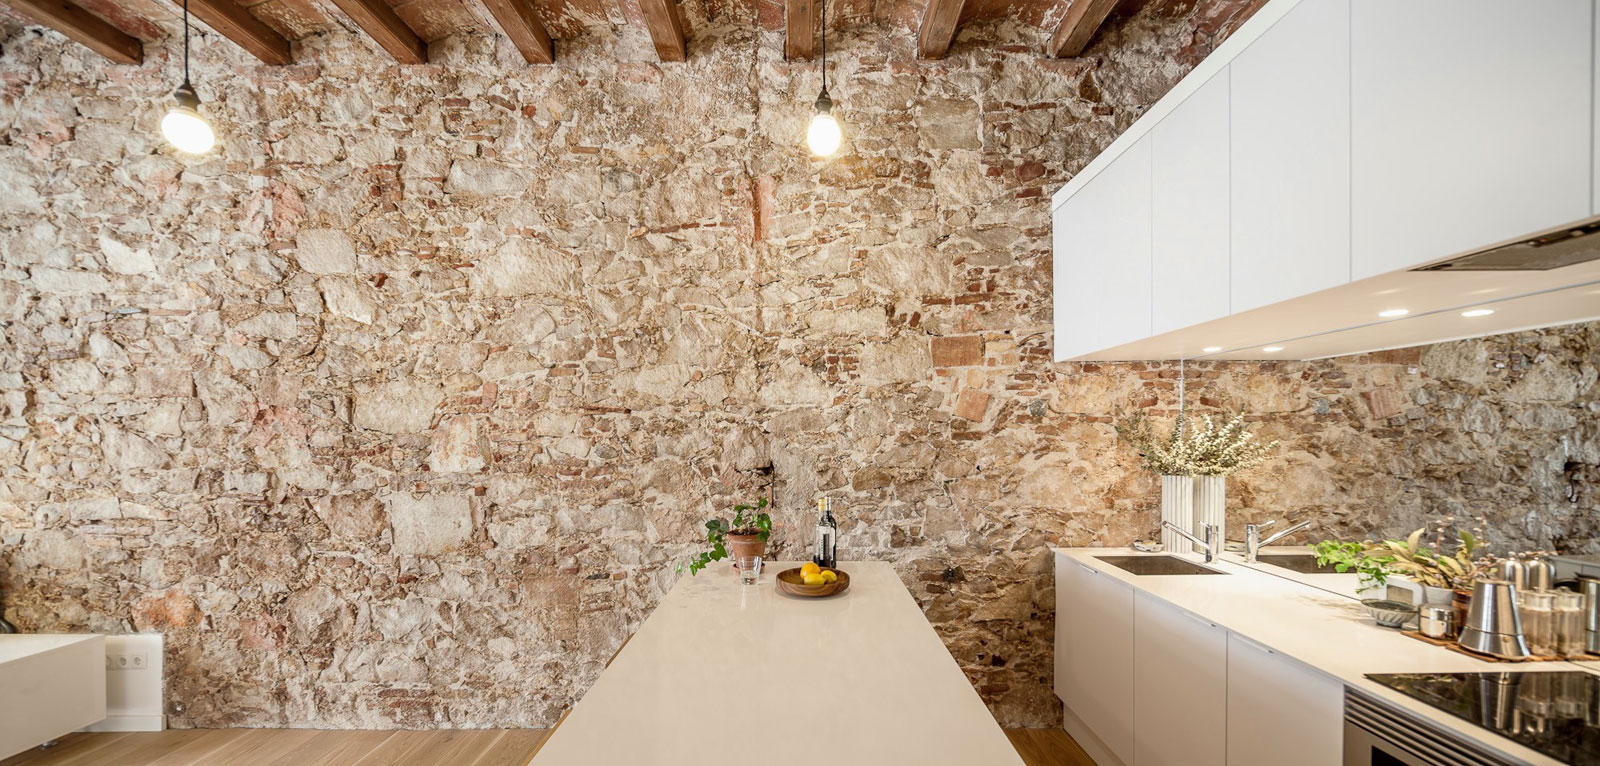 Renovation Apartment in Les Corts kitchen stone wall